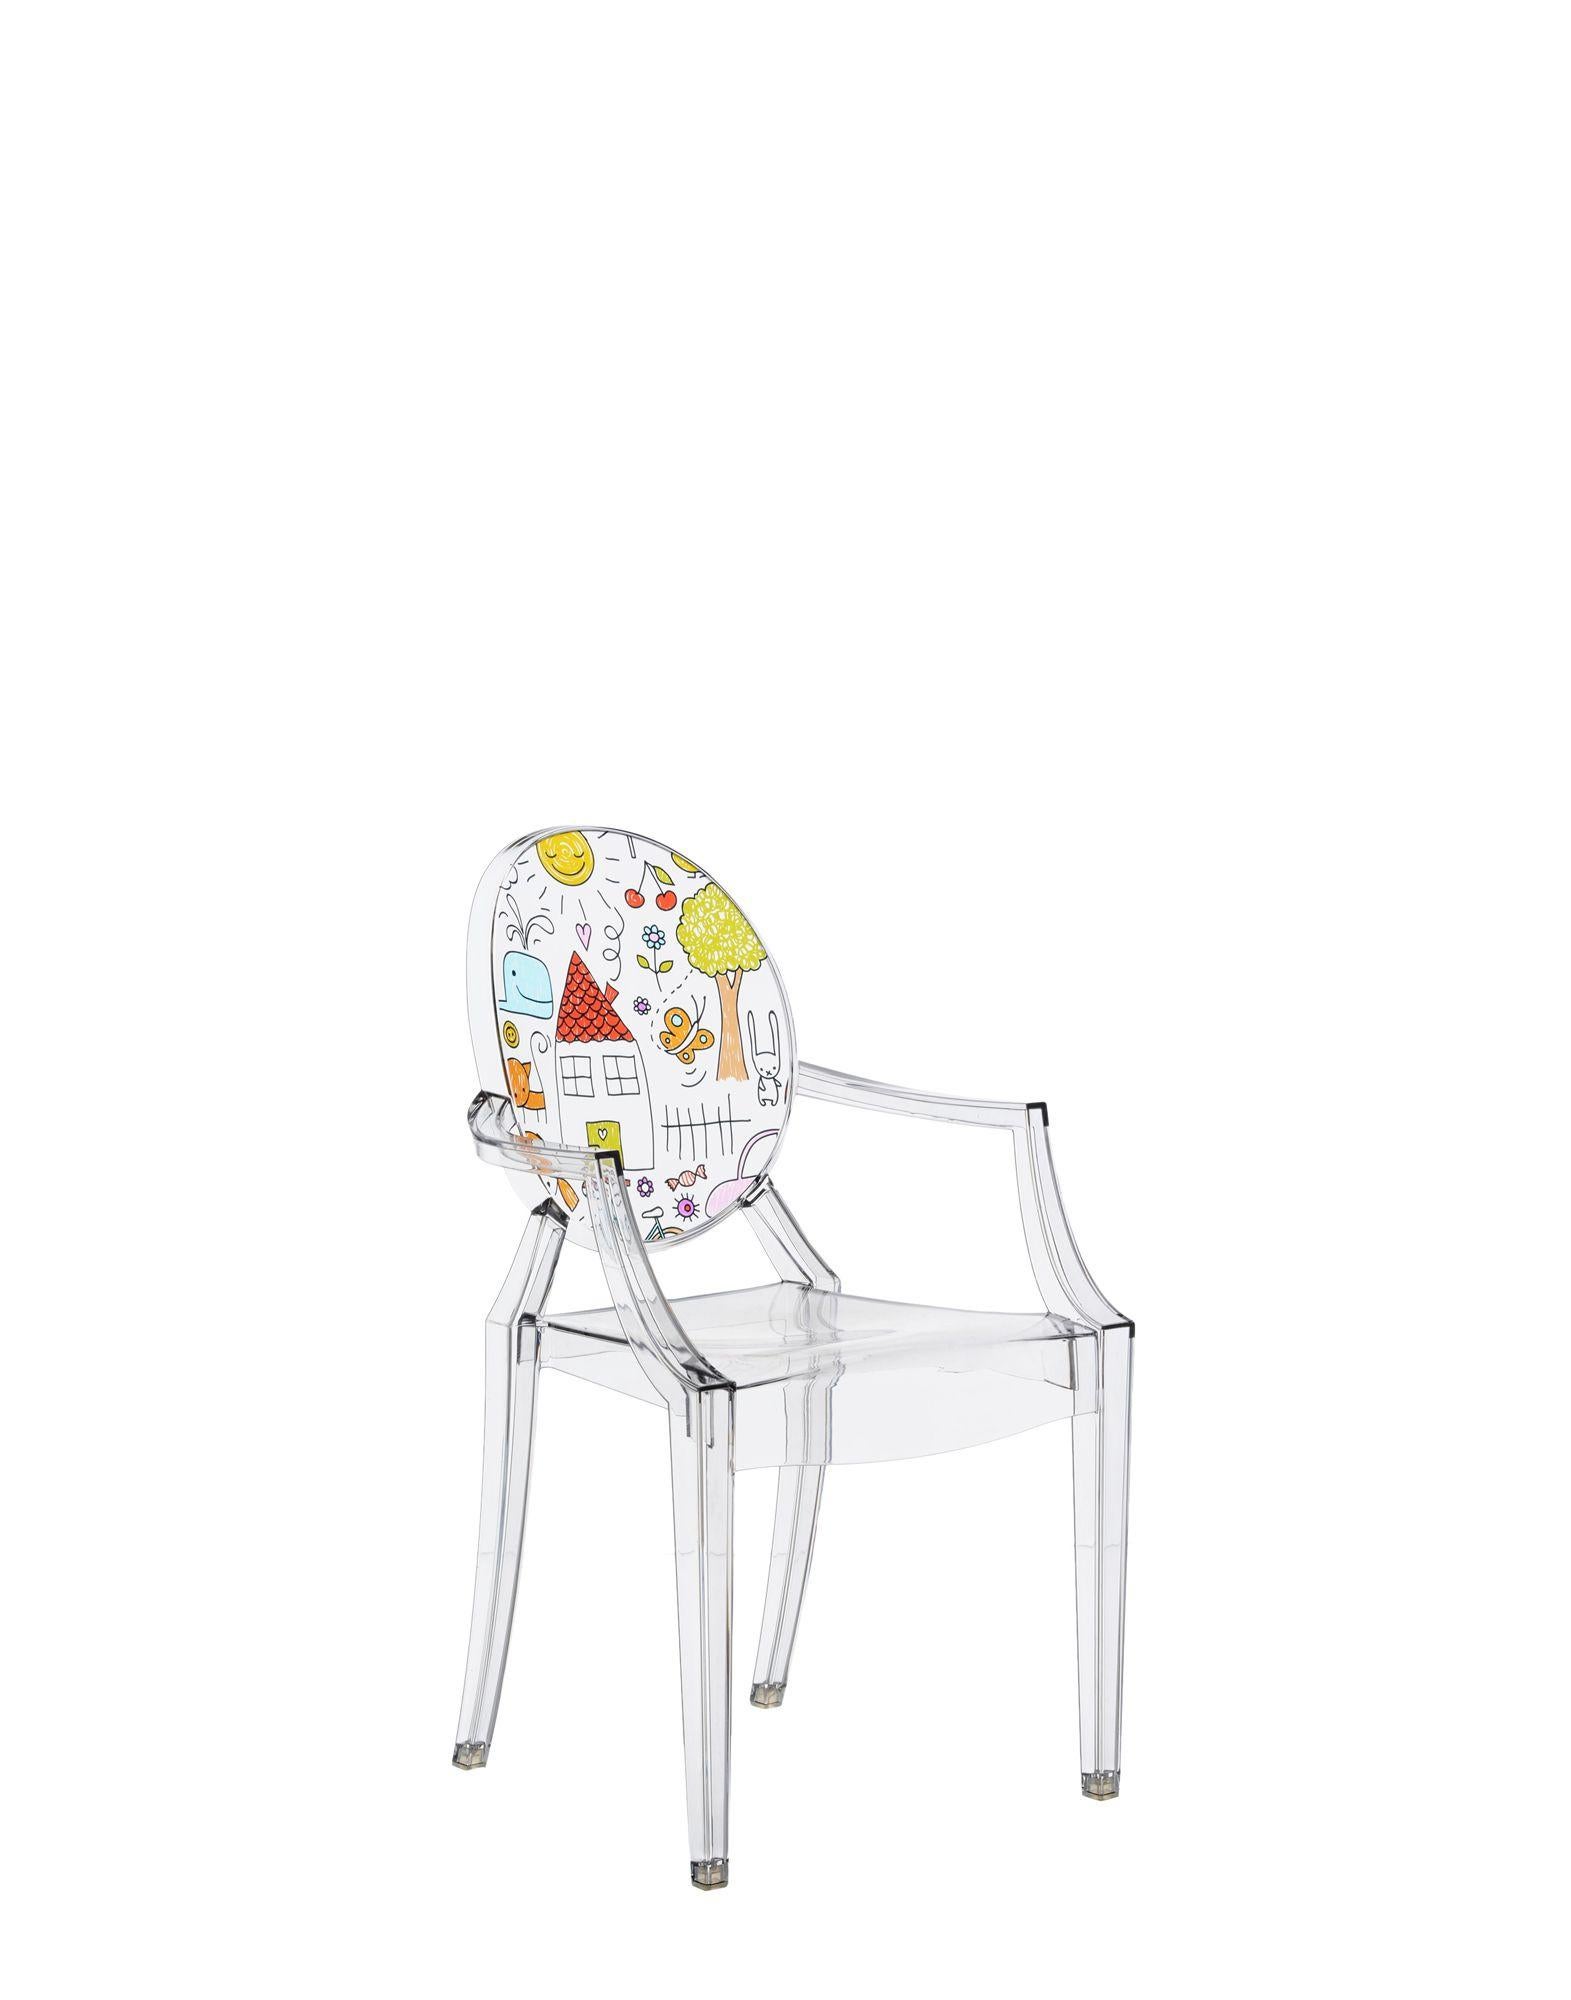 The miniature version of one of the most famous design chairs joins the Kartell Kids line in several new versions. Philippe Starck's Lou Lou Ghost gets new and customizable graphics for the fun world of kids.

Dimensions: Height 24.75 in, diameter